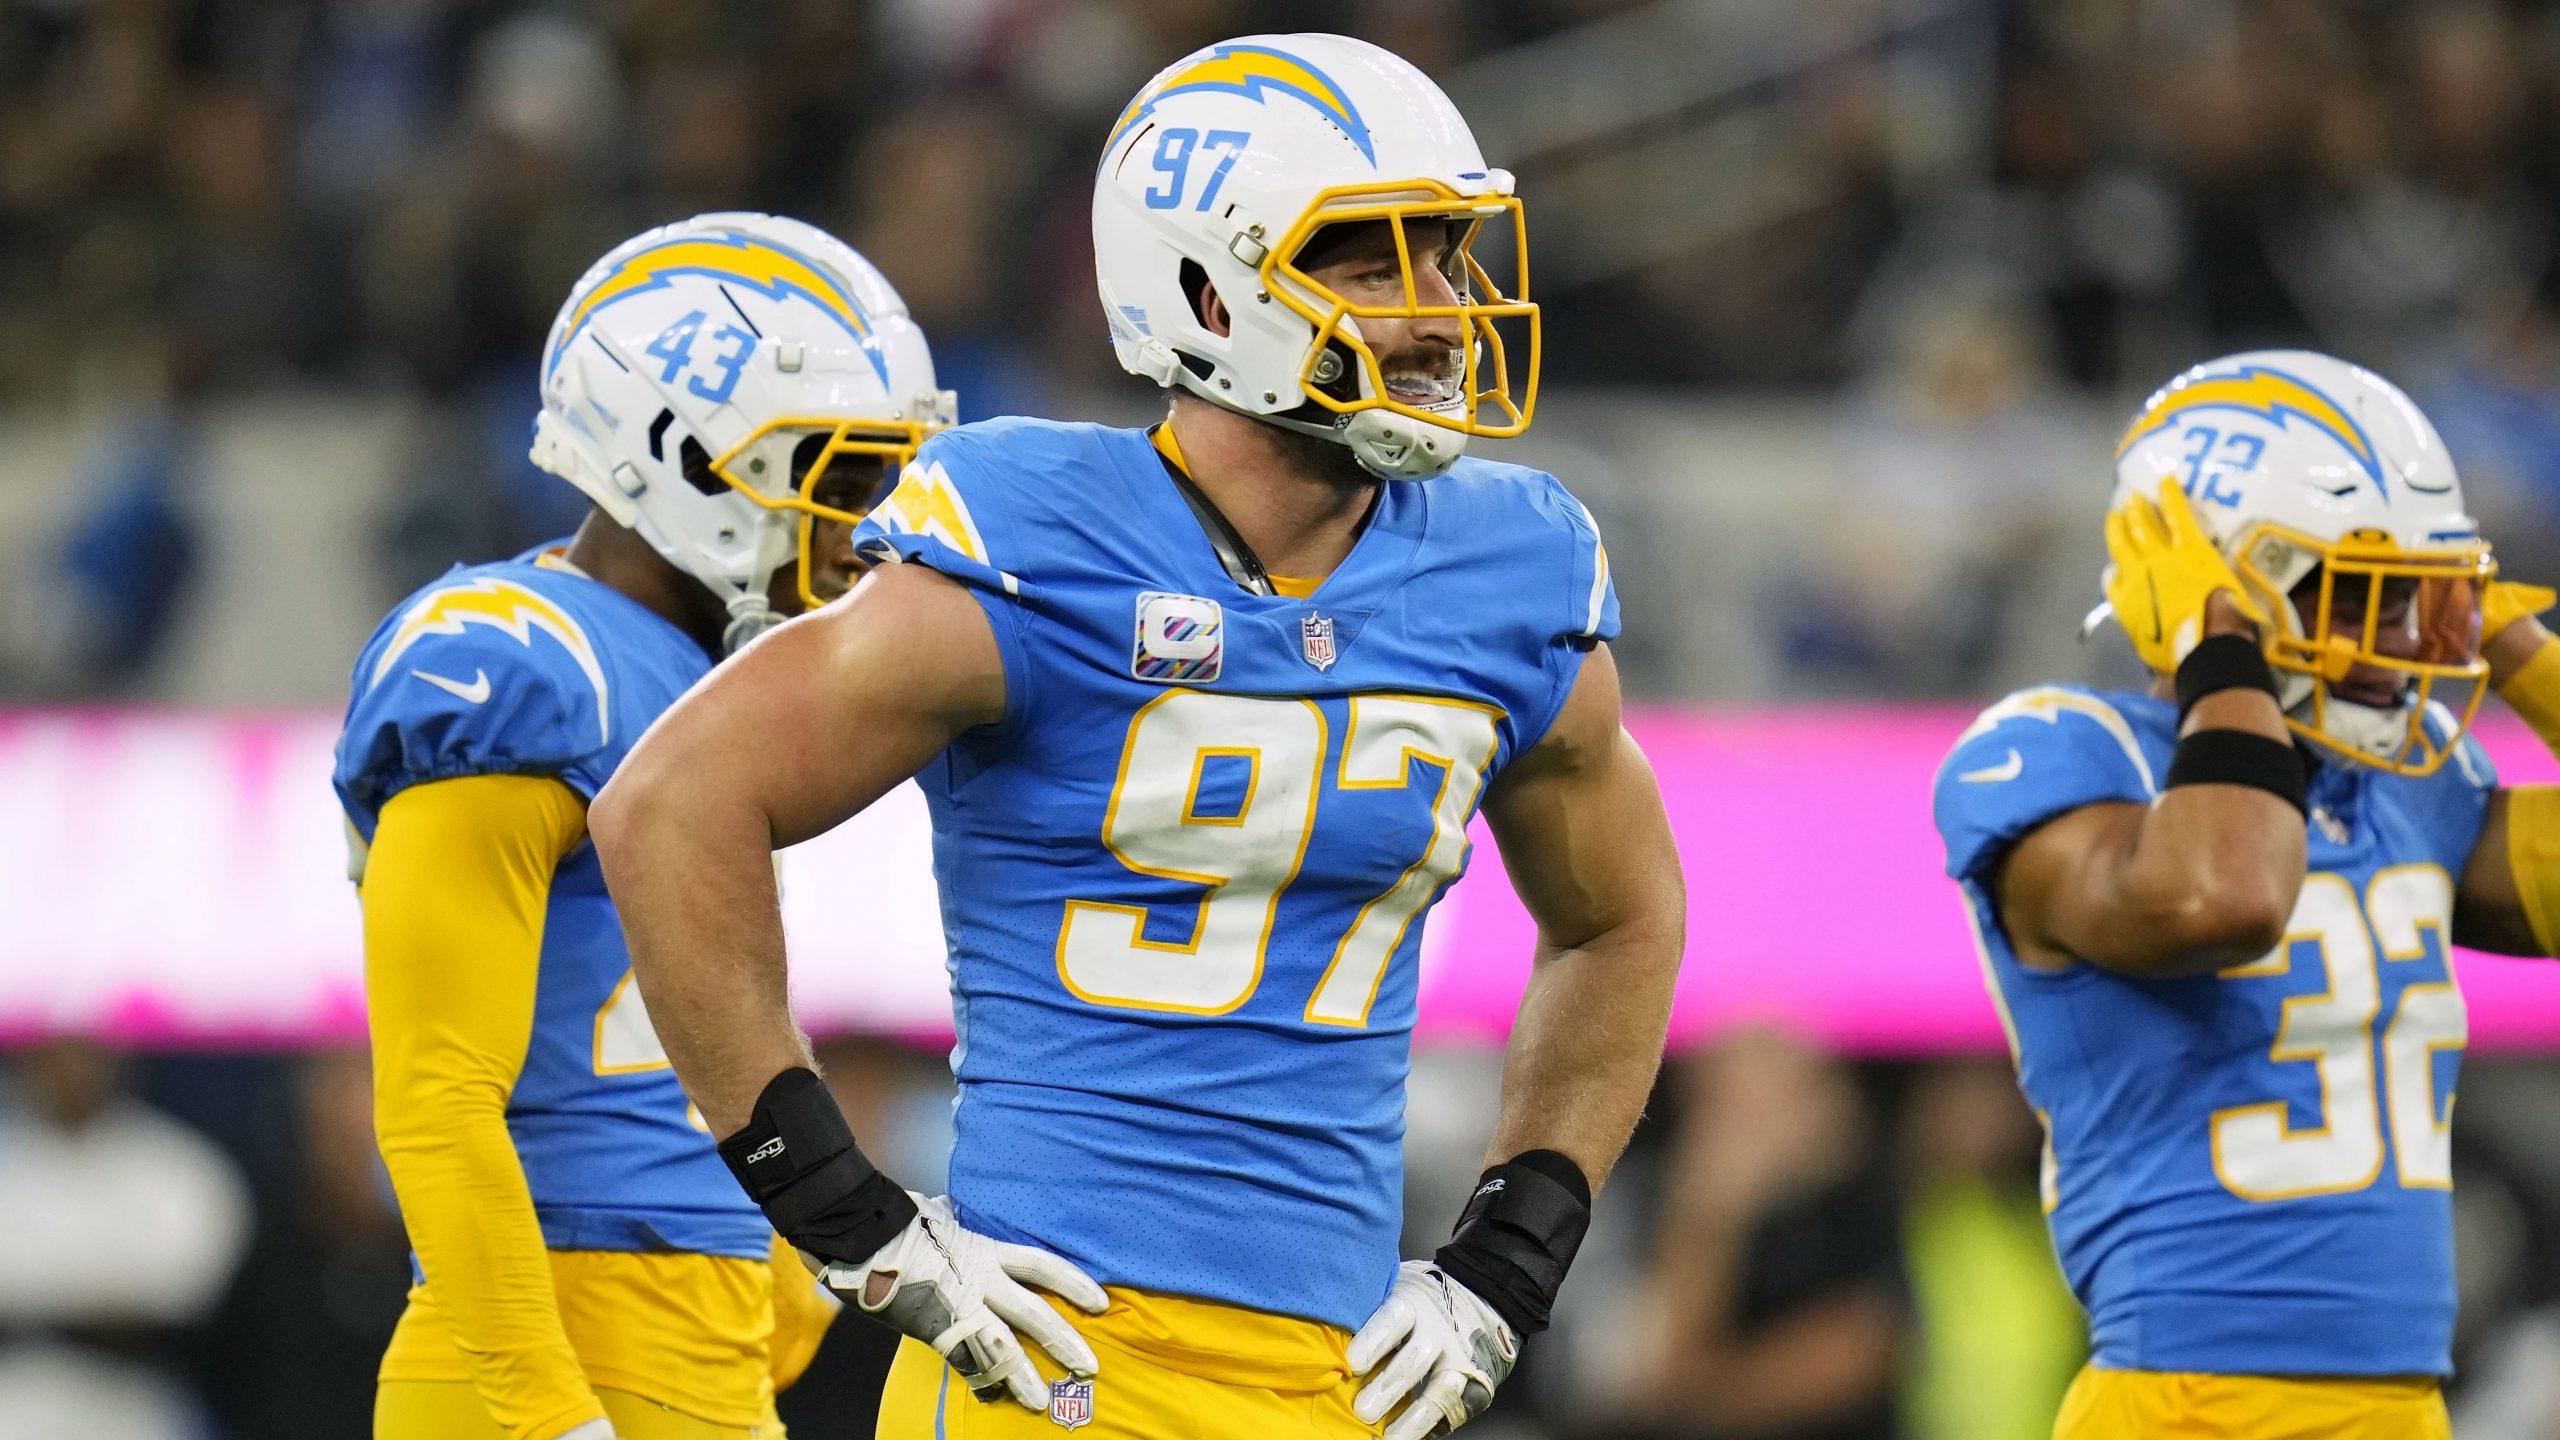 Chargers’ Joey Bosa rips into NFL officials after missed call: ‘Open your eyes and do your job’